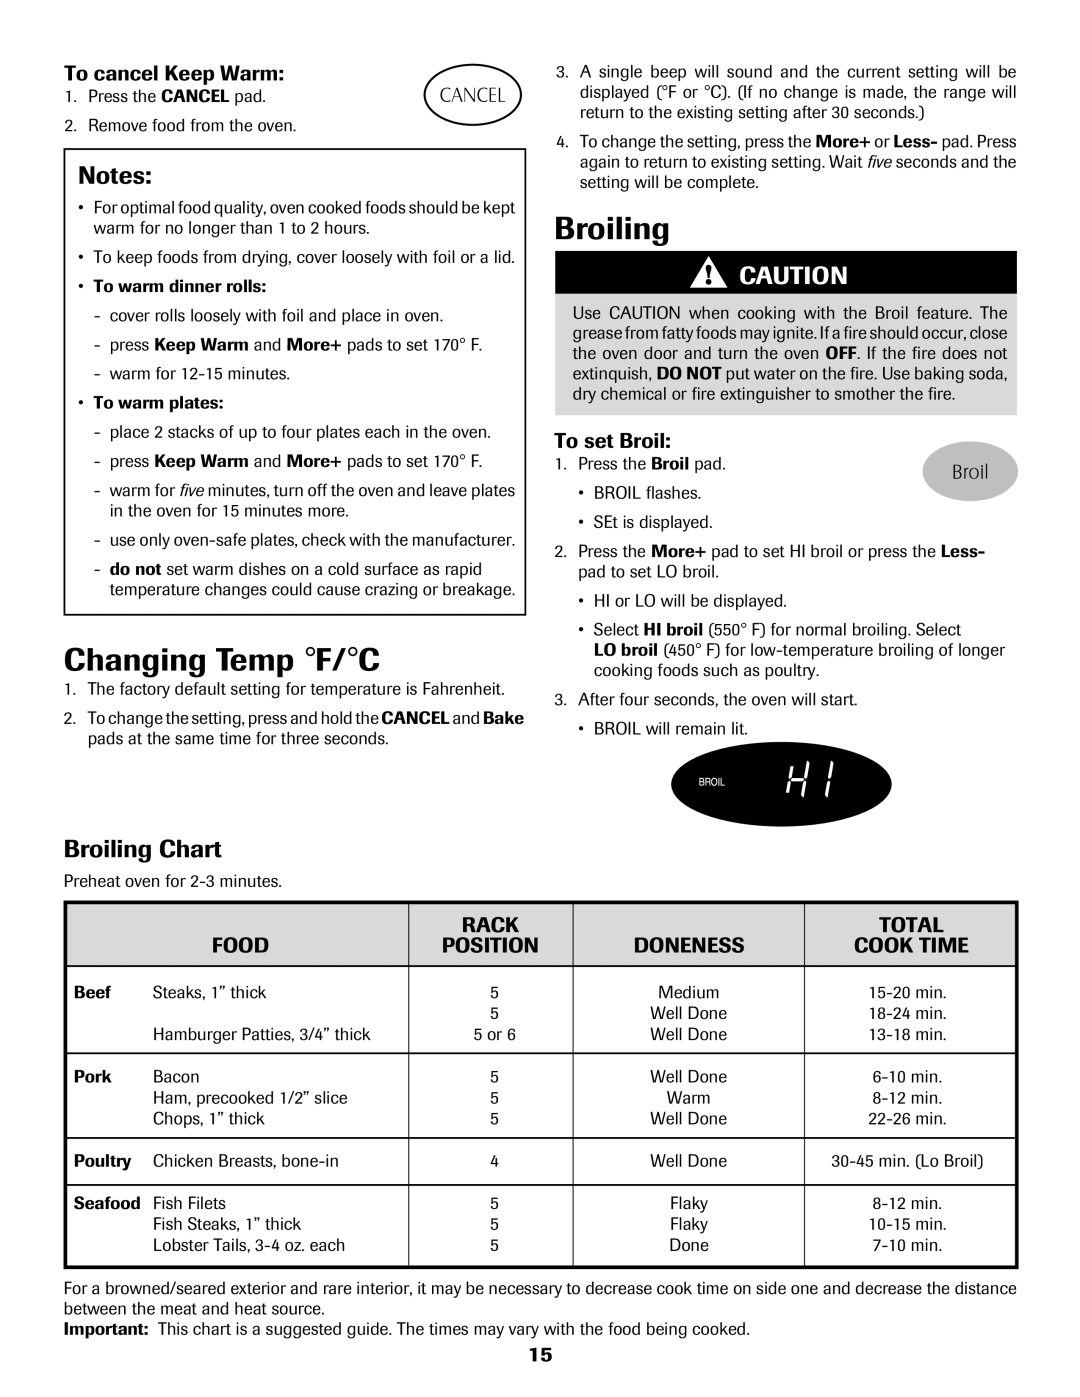 Magic Chef MGR5765QDW Changing Temp F/C, Broiling Chart, To cancel Keep Warm, To set Broil, Rack, Total, Food, Notes 